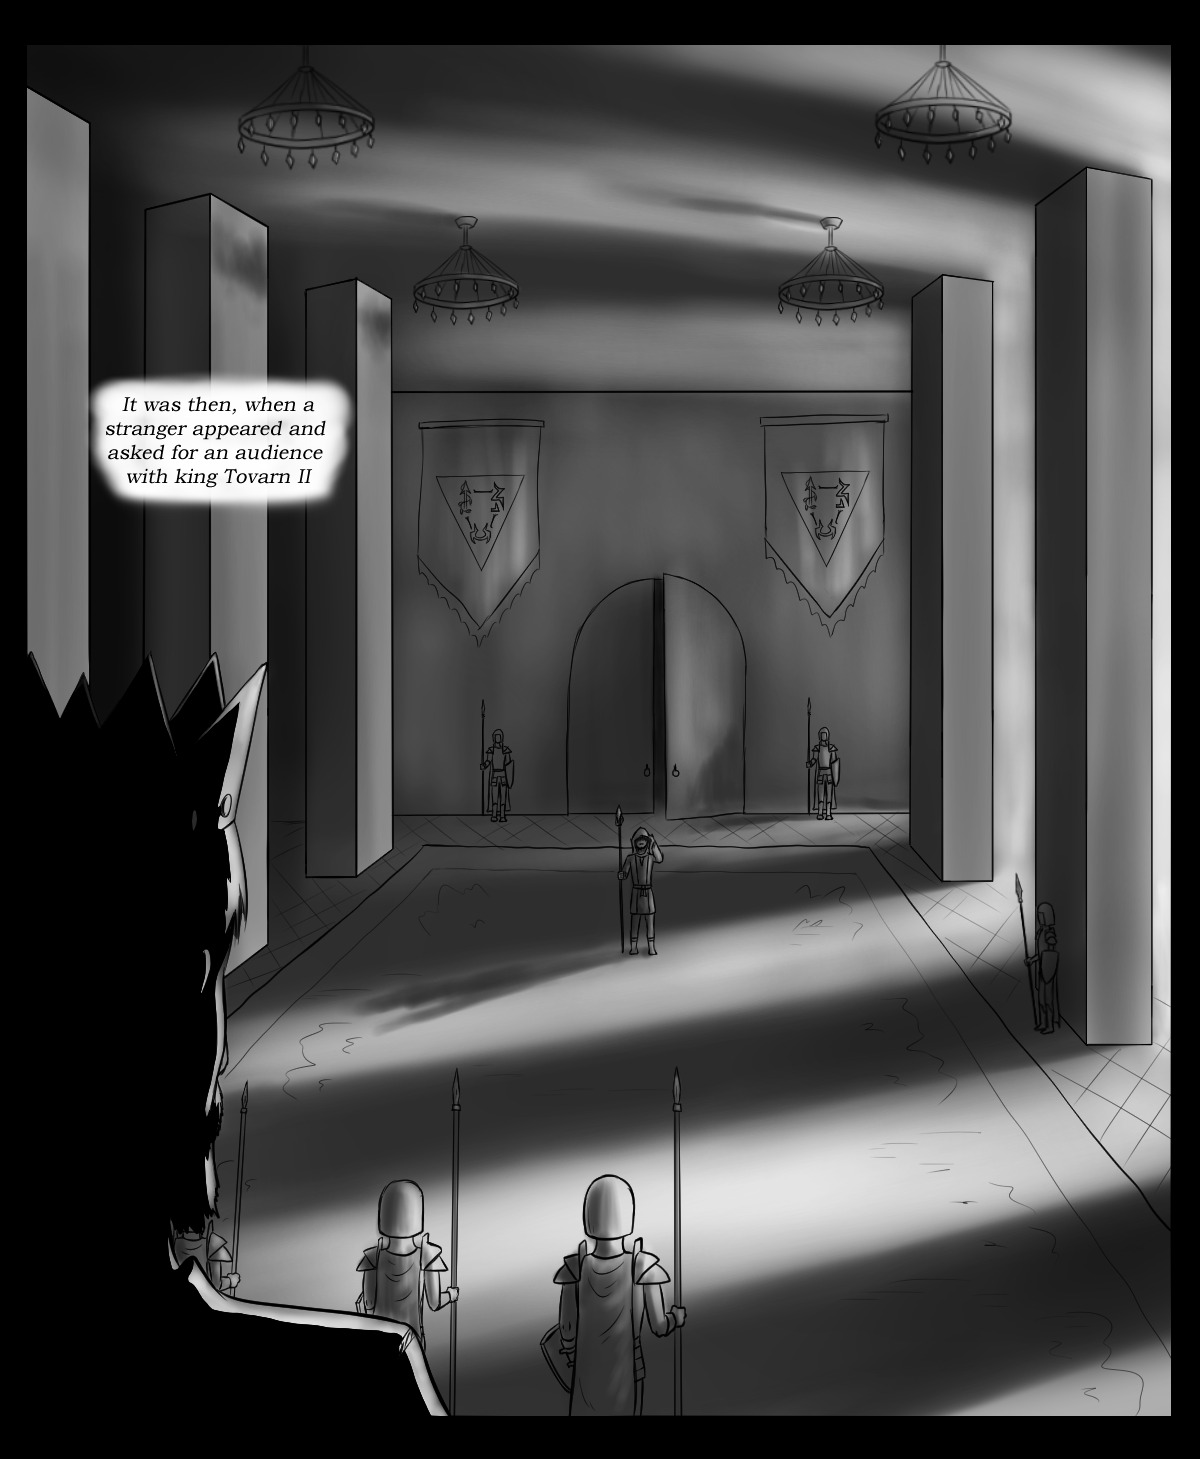 Page 25 - The legend of Kern (Part 4)